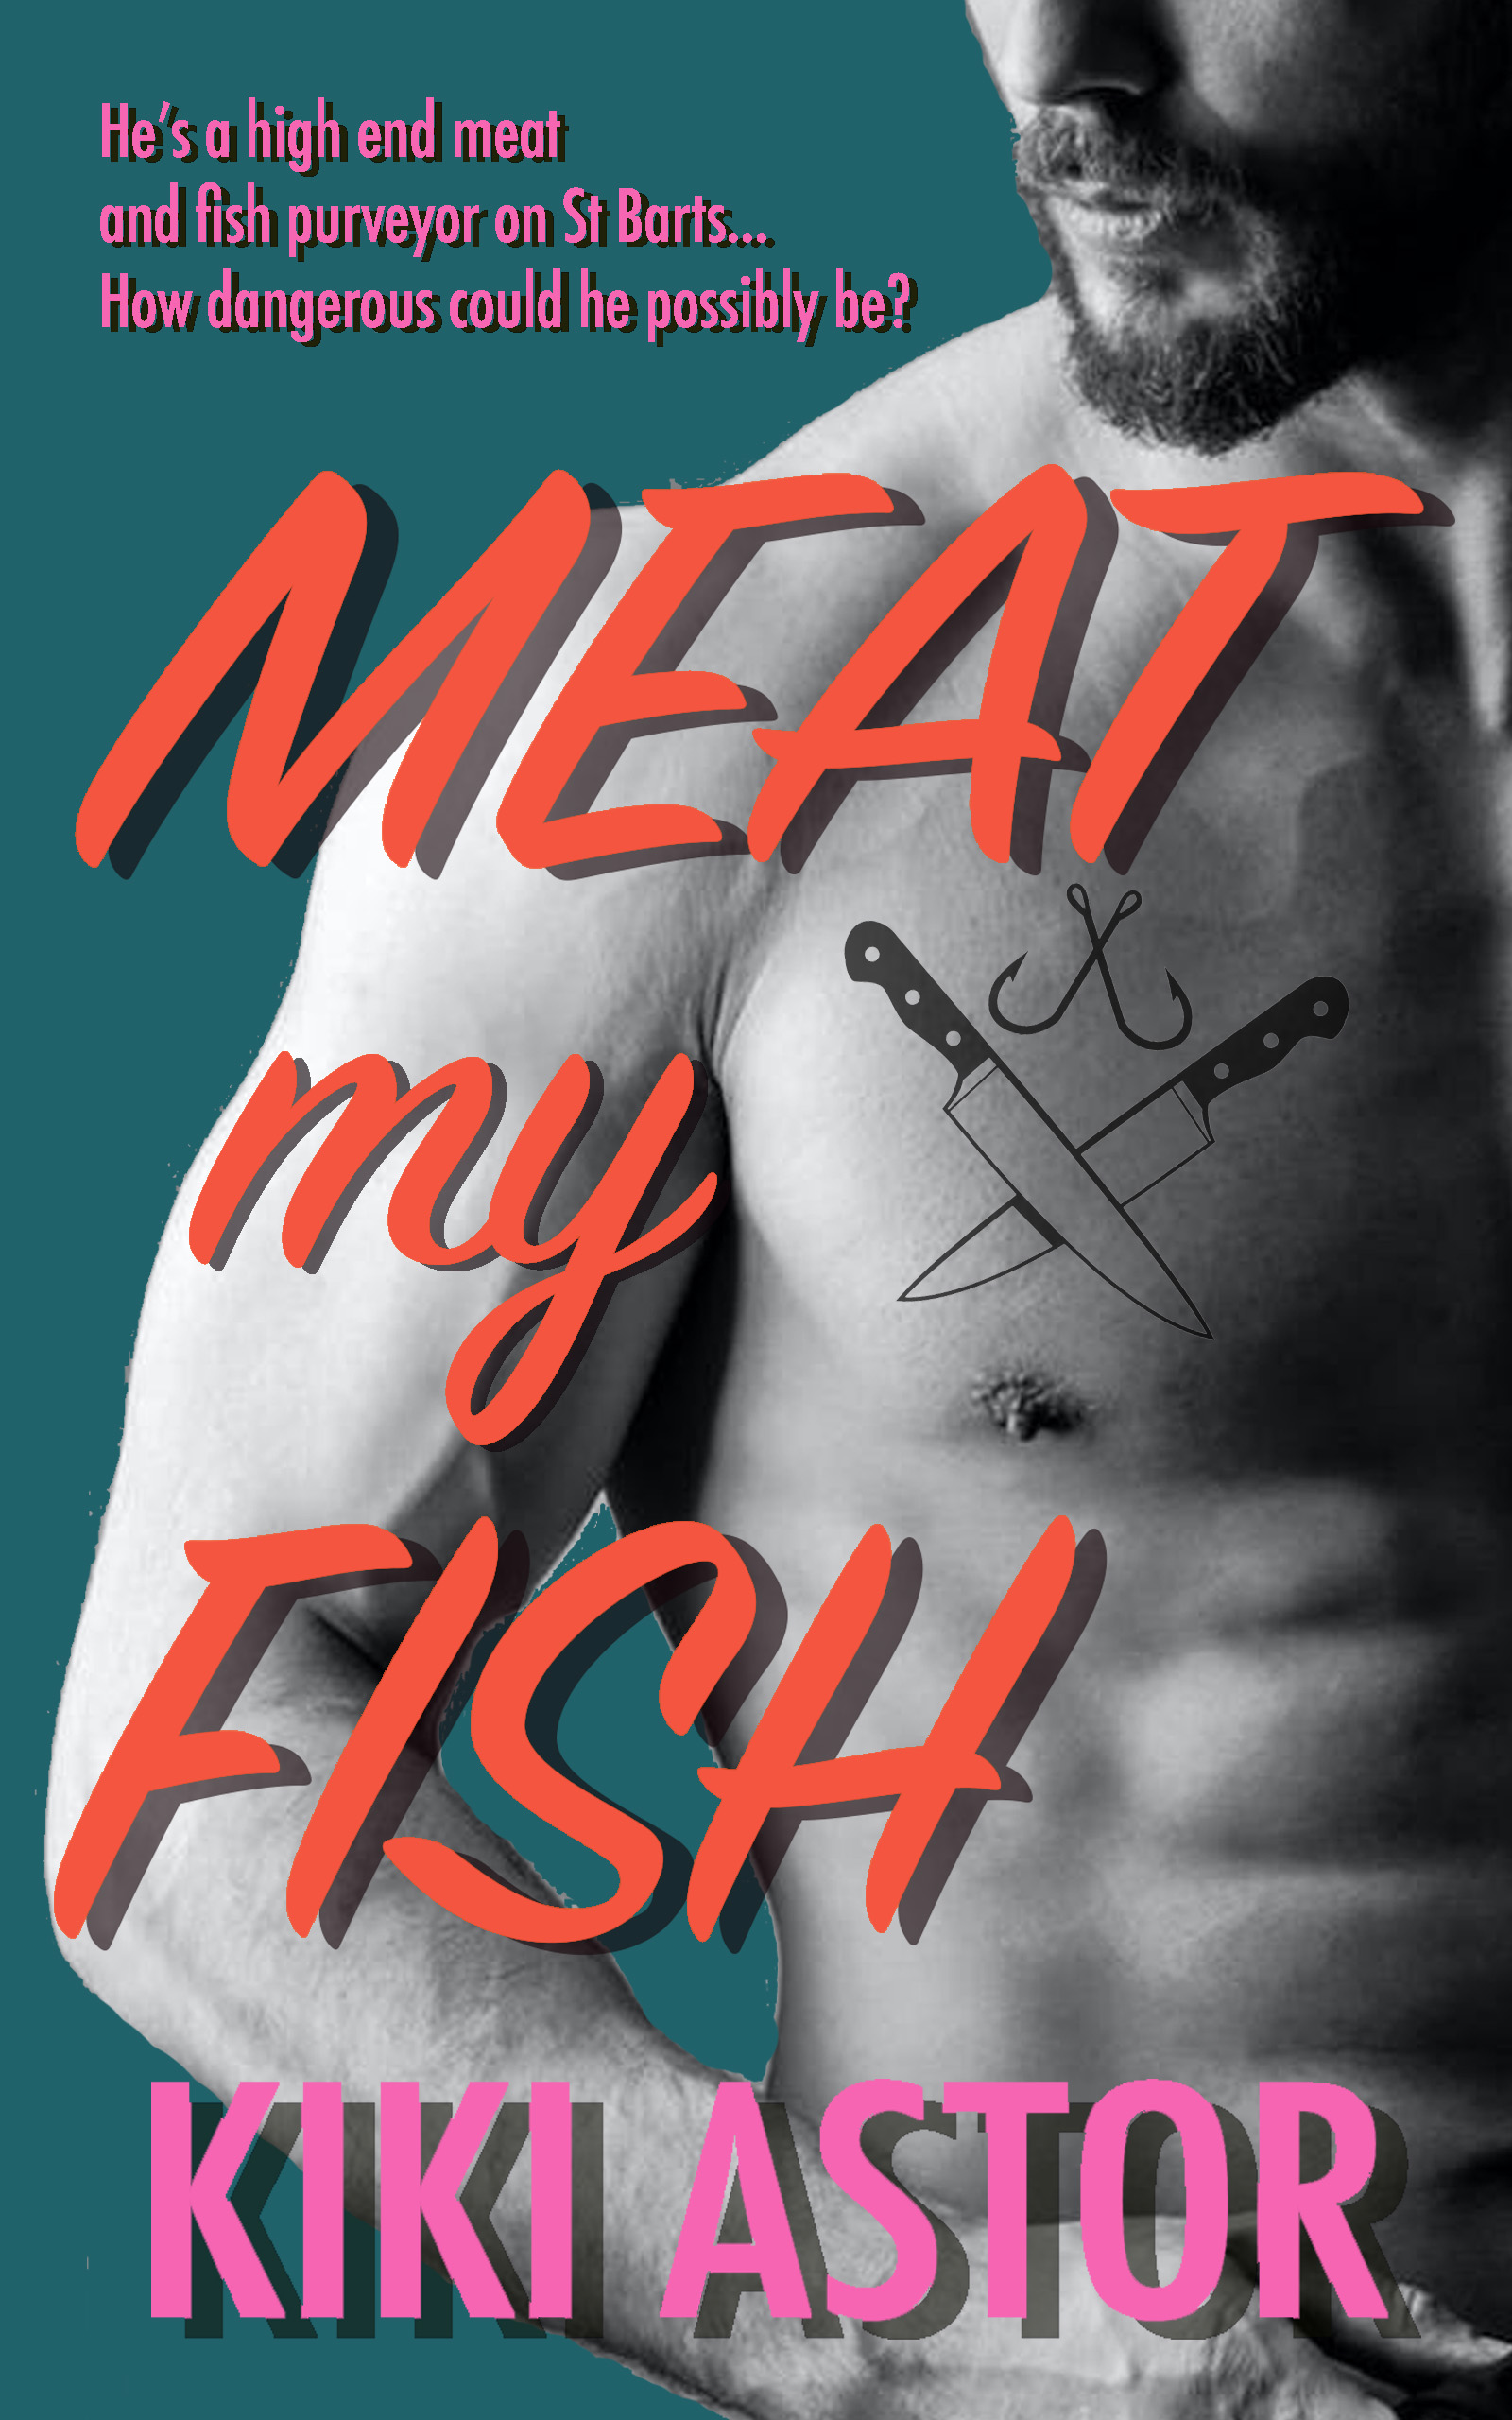 The cover of romance novel "Meat my Fish" by Kiki Astor, featuring a handsome shirtless man.